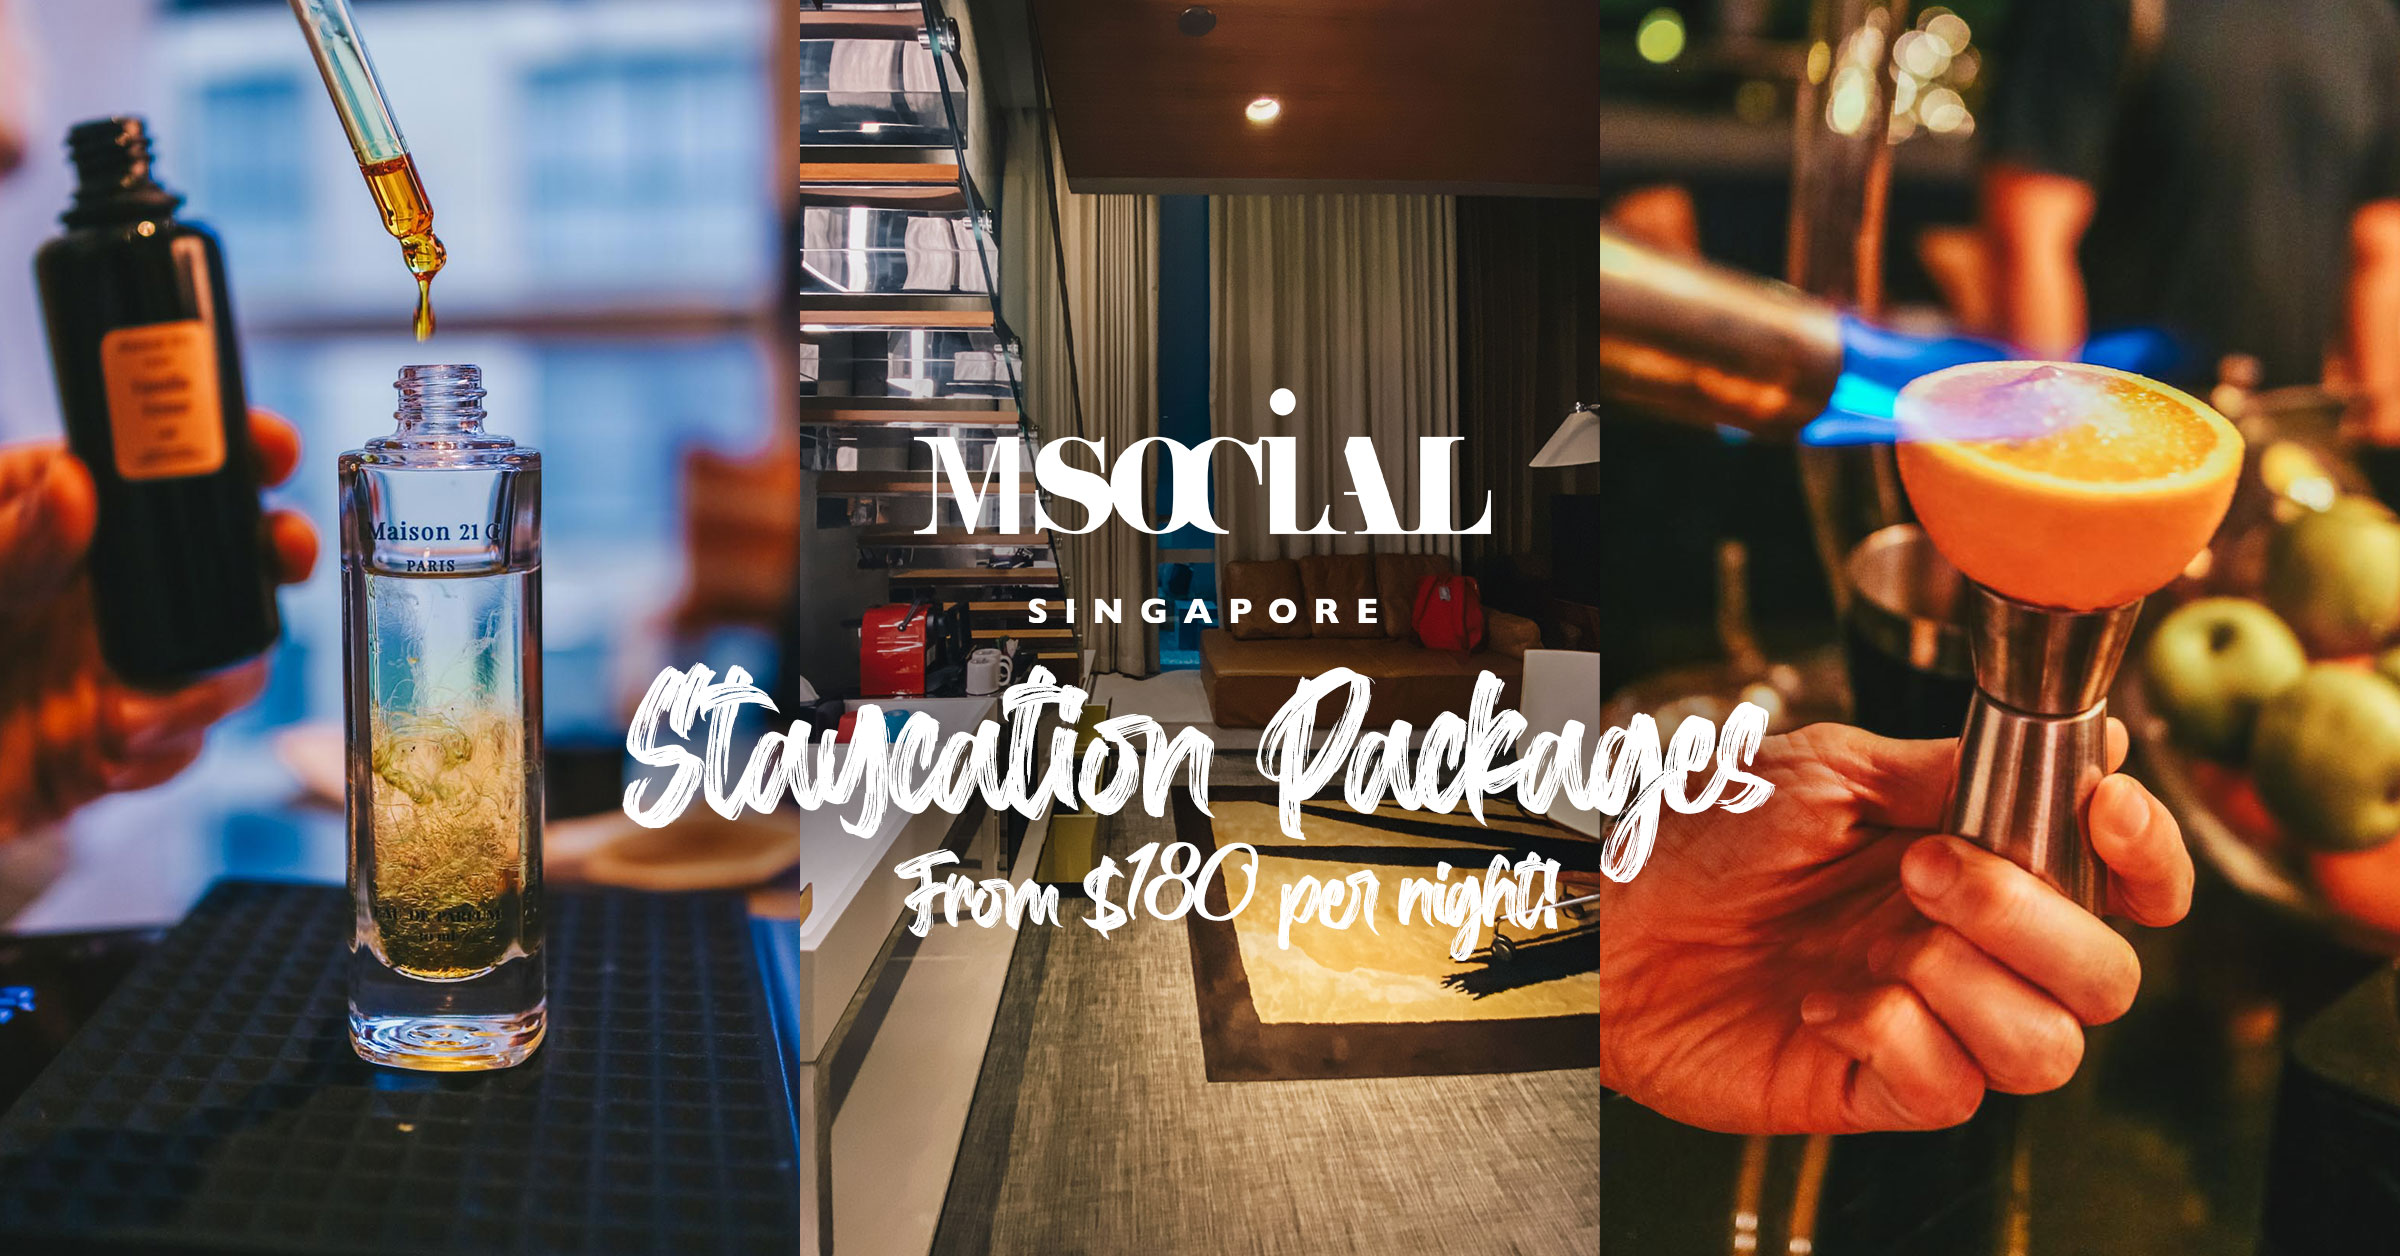 M-Social-Singapore-Staycation-Packages-2020-featured